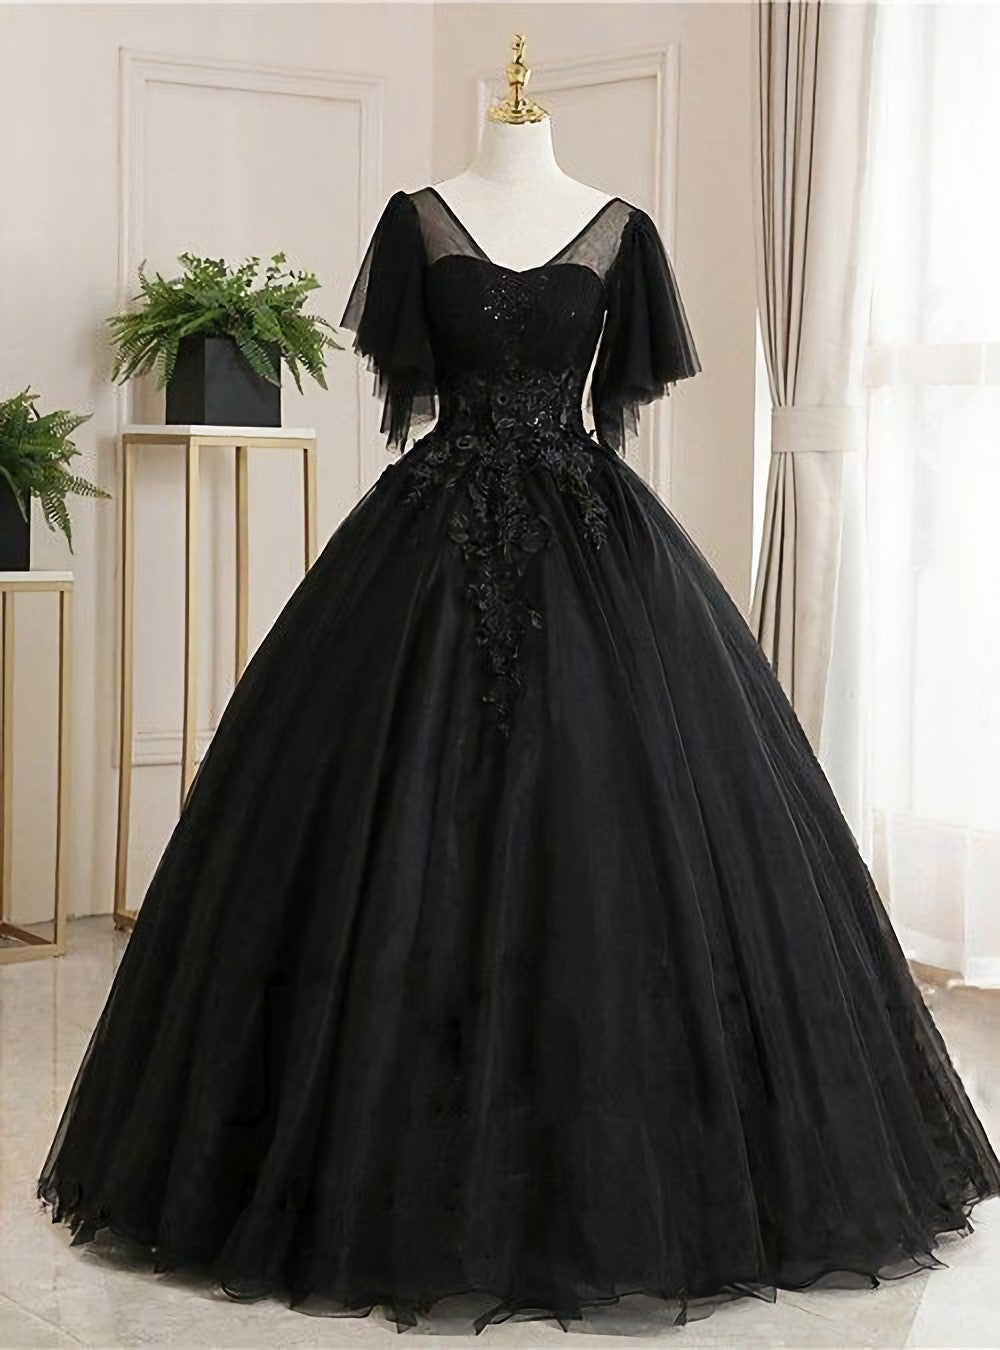 Ball Gown Luxurious Floral Quinceanera Prom Dress, Scoop Neck Short Sleeve Floor Length Tulle With Pleats Embroidery